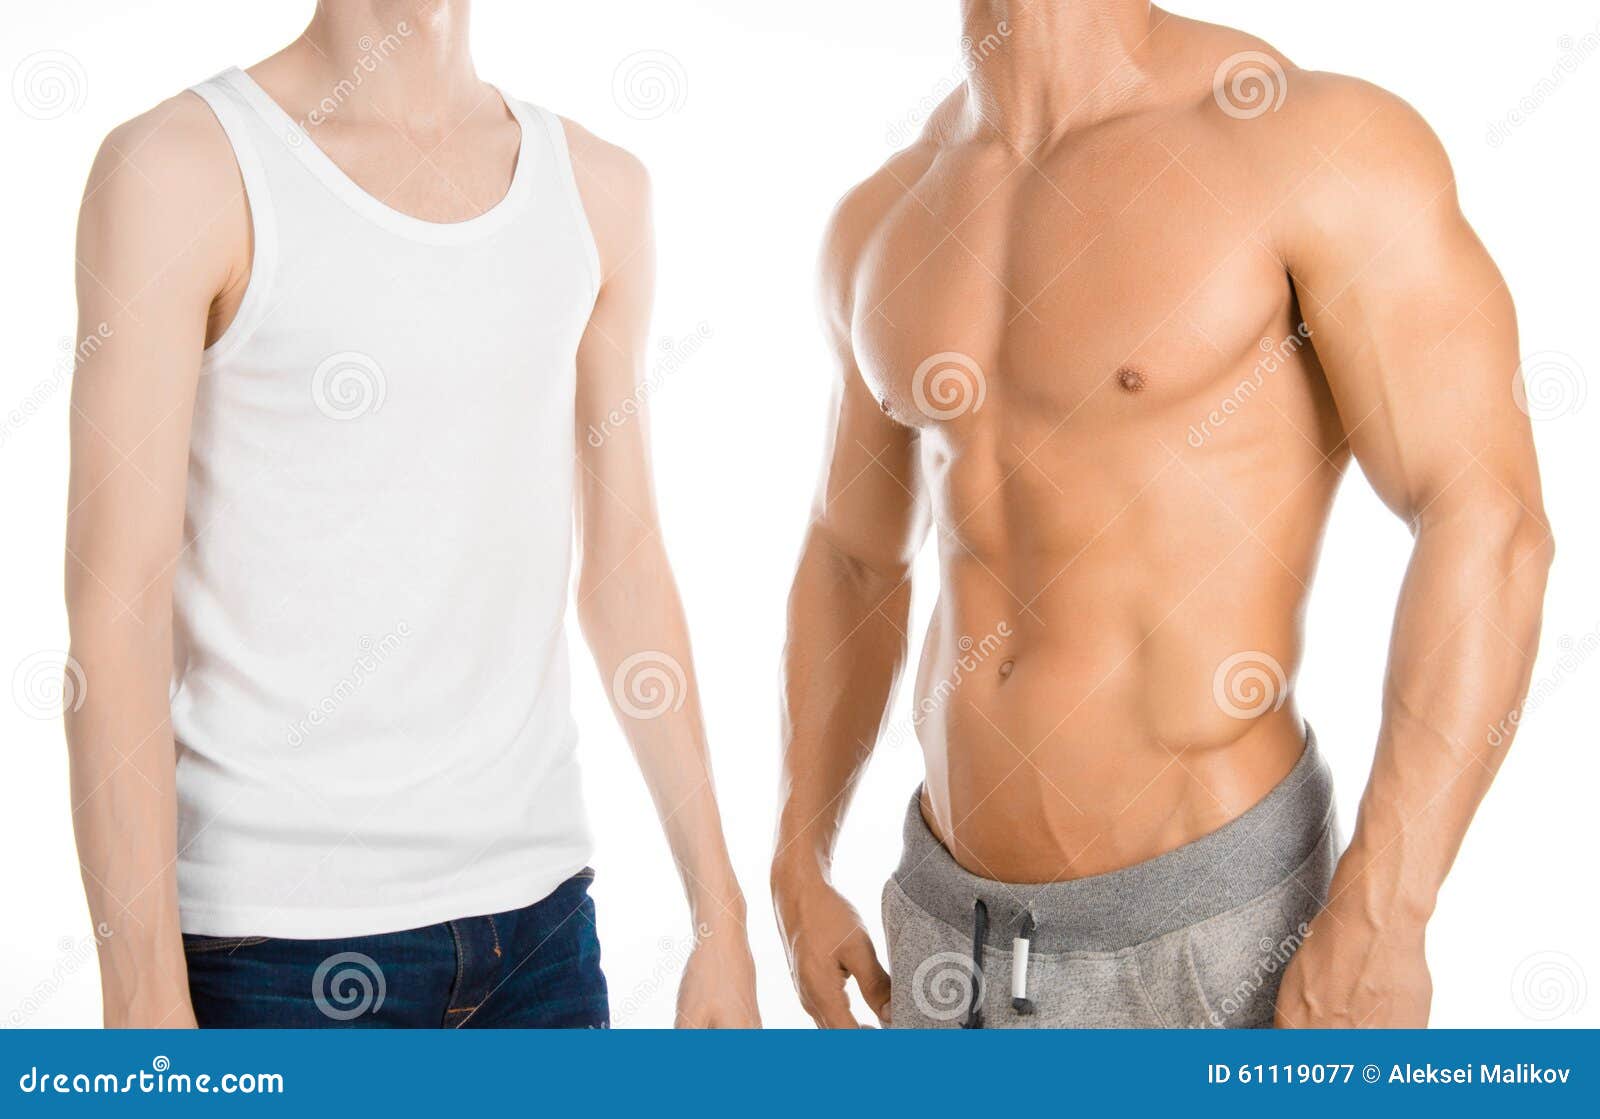 Bodybuilding Coach Topic Beautiful Strong Bodybuilder Coach Stands Next To A Thin Man Isolated On A White Background In The Studi Stock Image Image Of Instructor Background